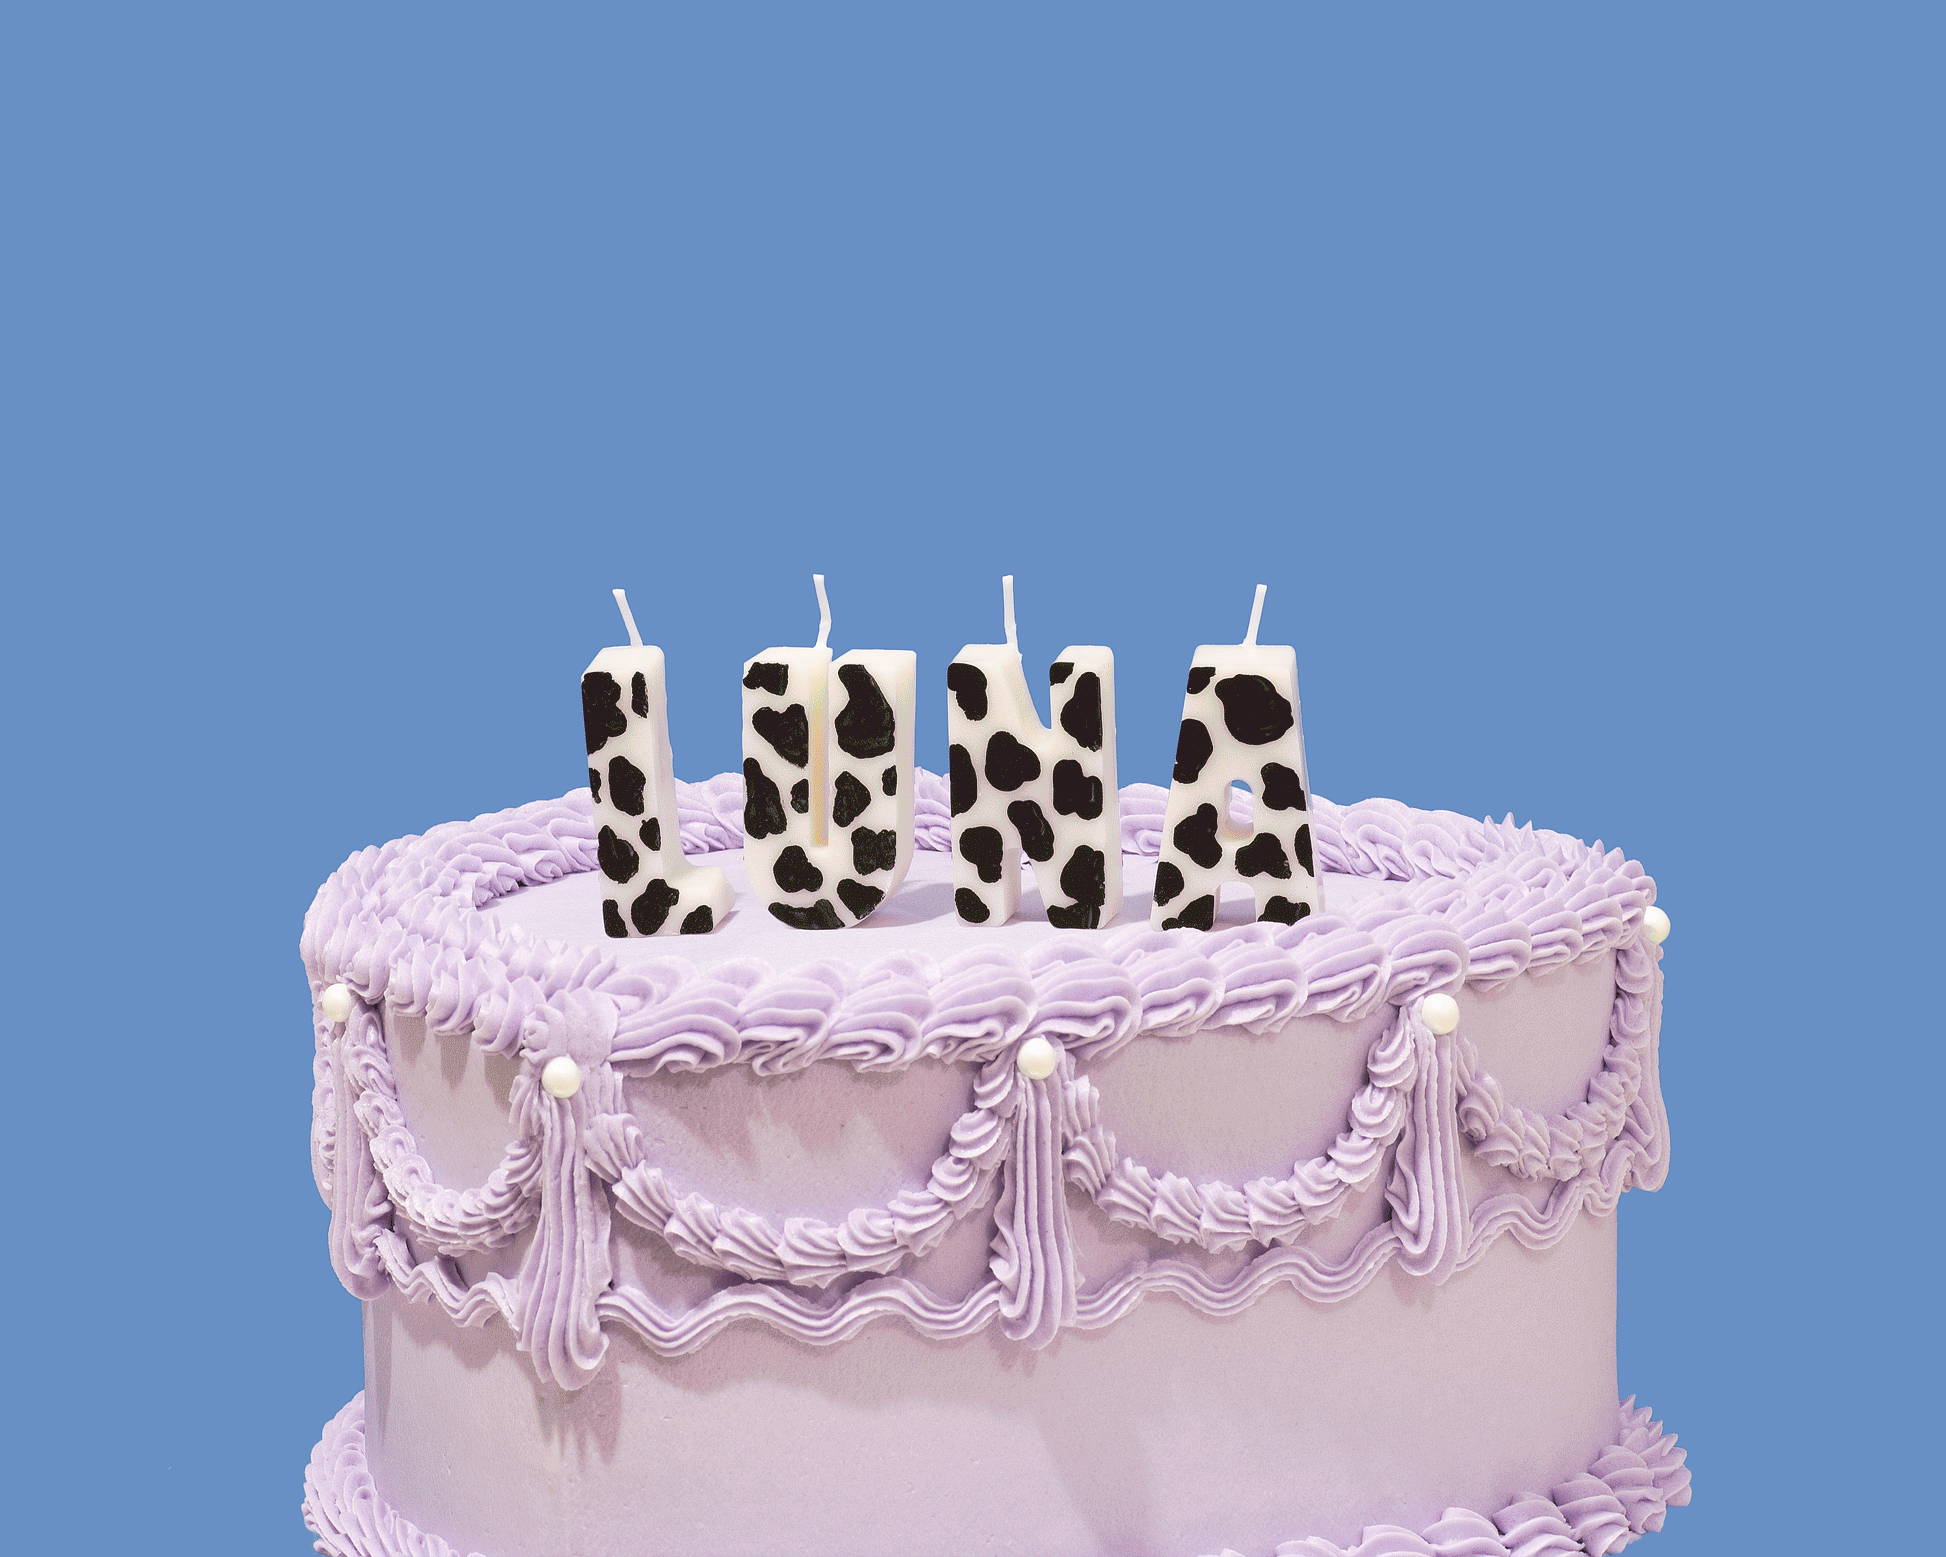 Moving GIF image of an iced purple cake topped with birthday candles that spell out different words and names. The candles are hand painted different colors and fun patterns. 